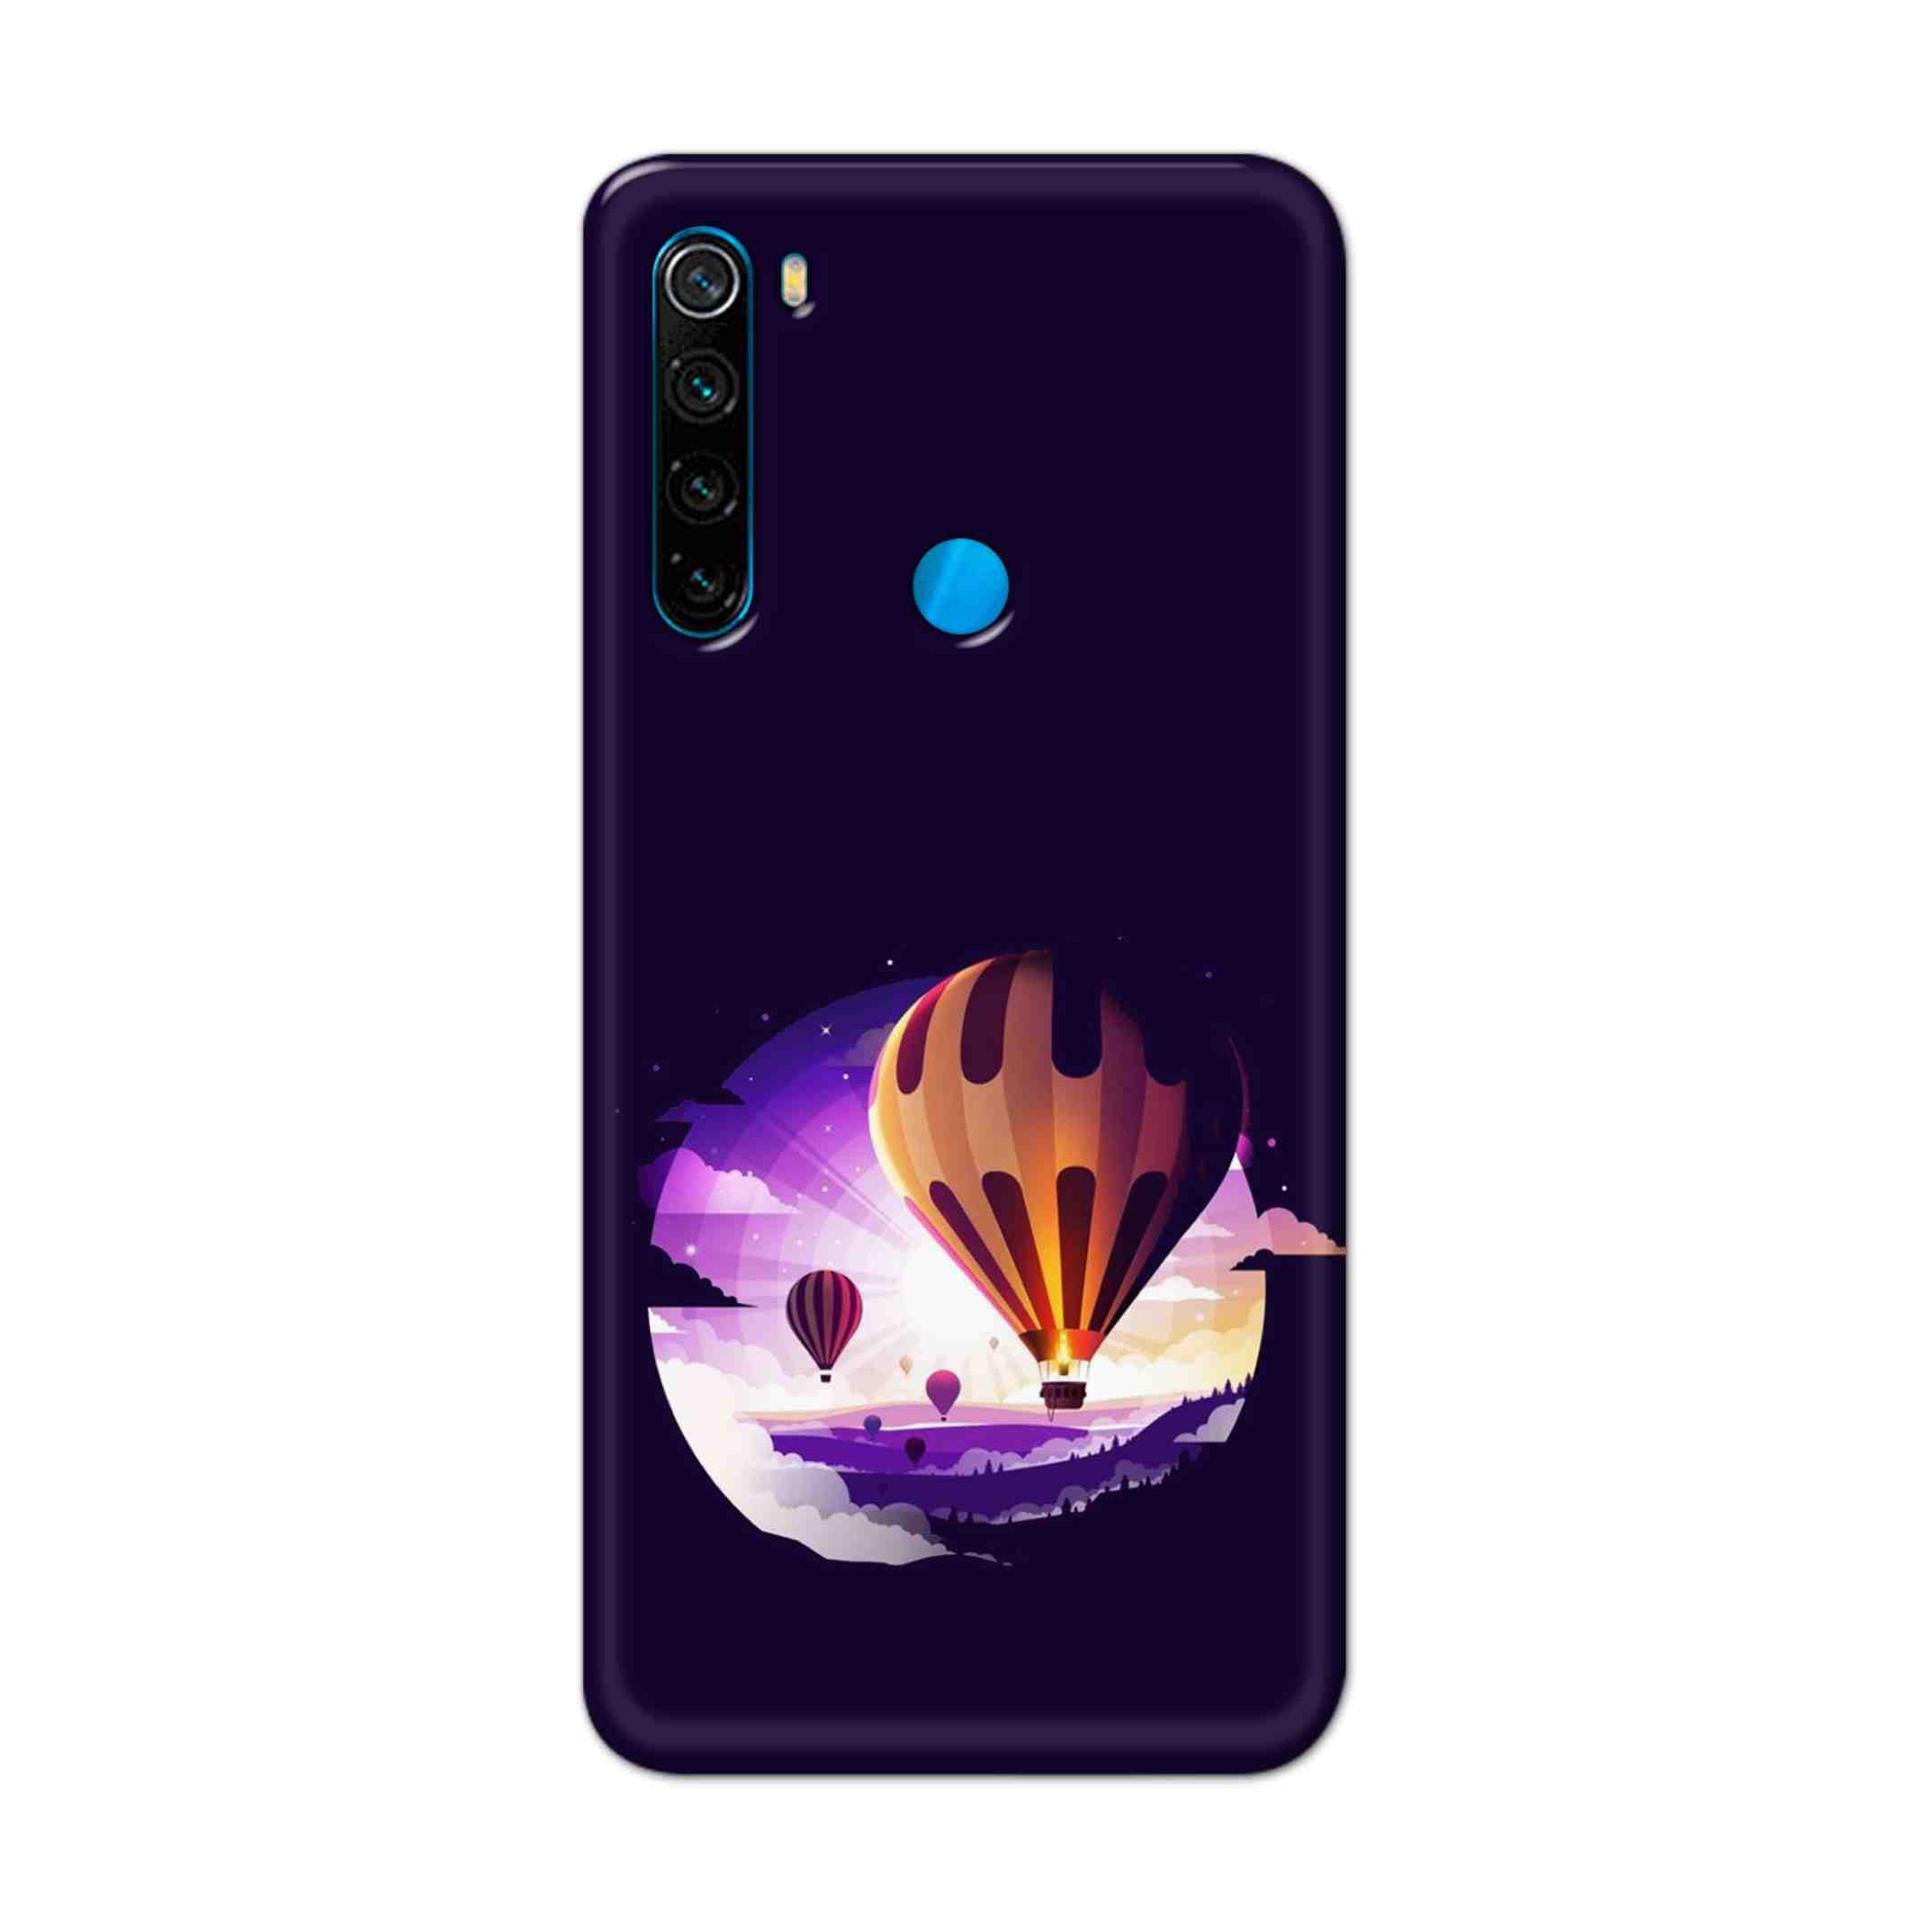 Buy Ballon Hard Back Mobile Phone Case Cover For Xiaomi Redmi Note 8 Online